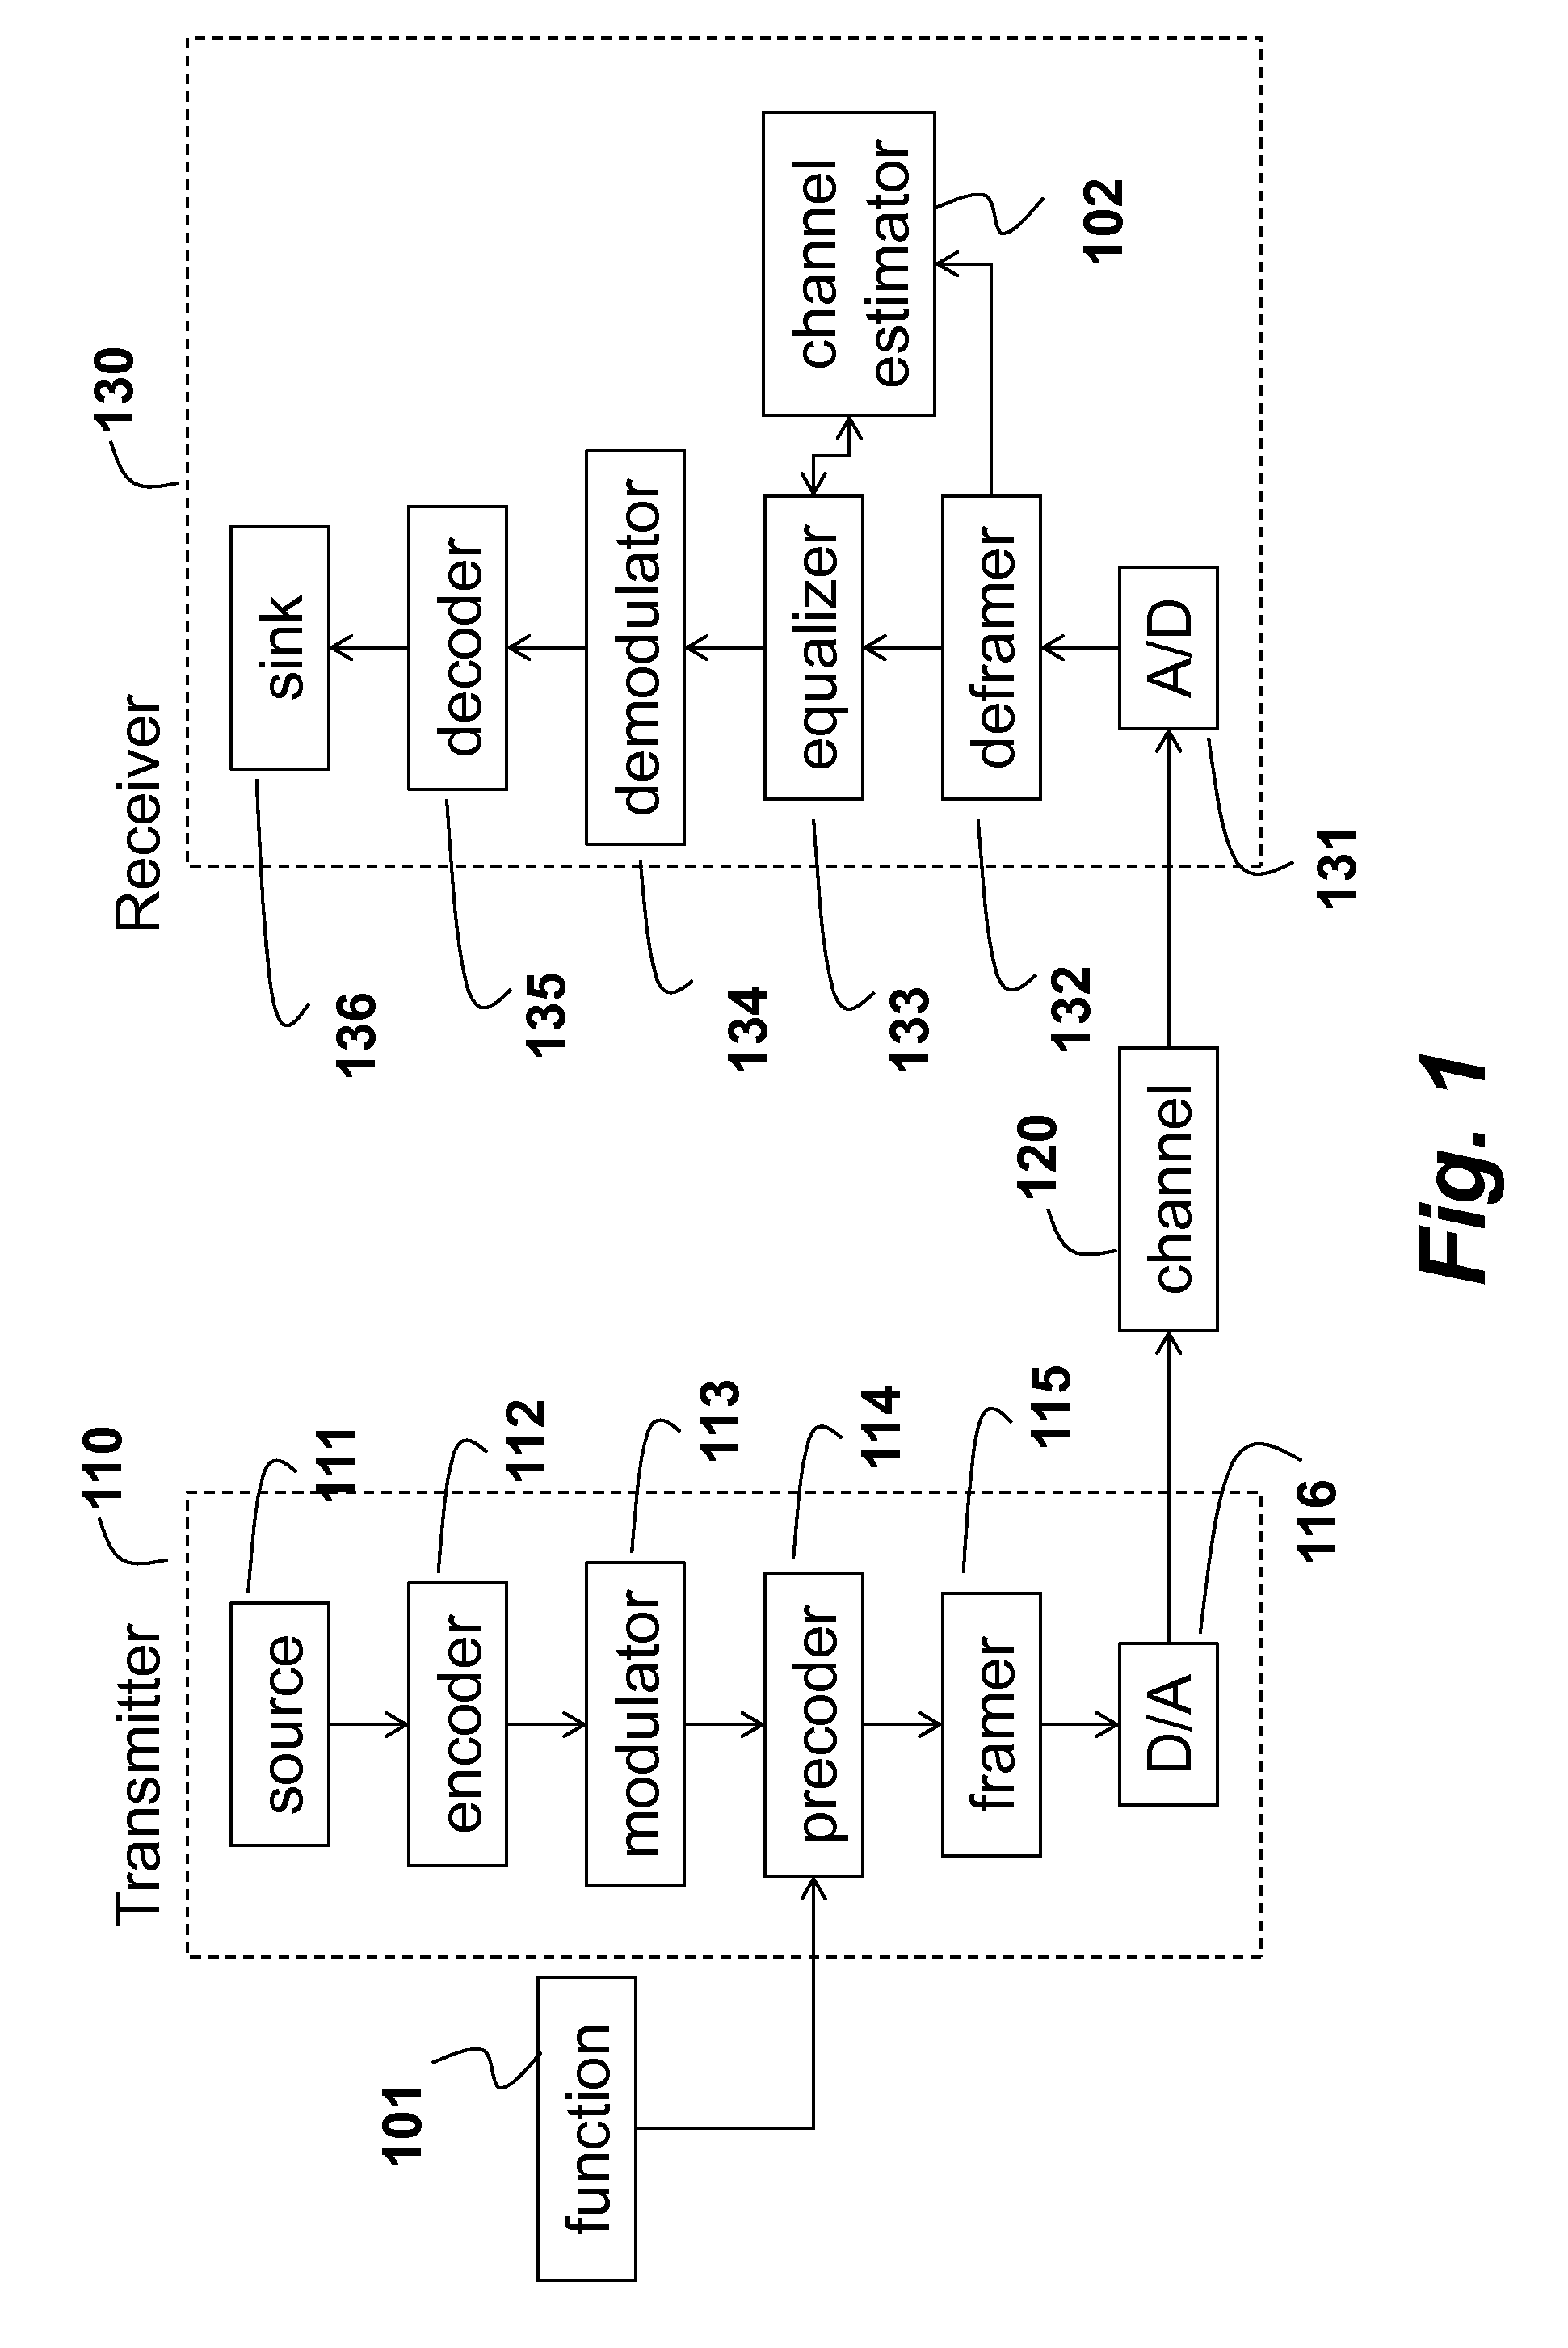 System and Method for Wireless Communications over Fading Channels